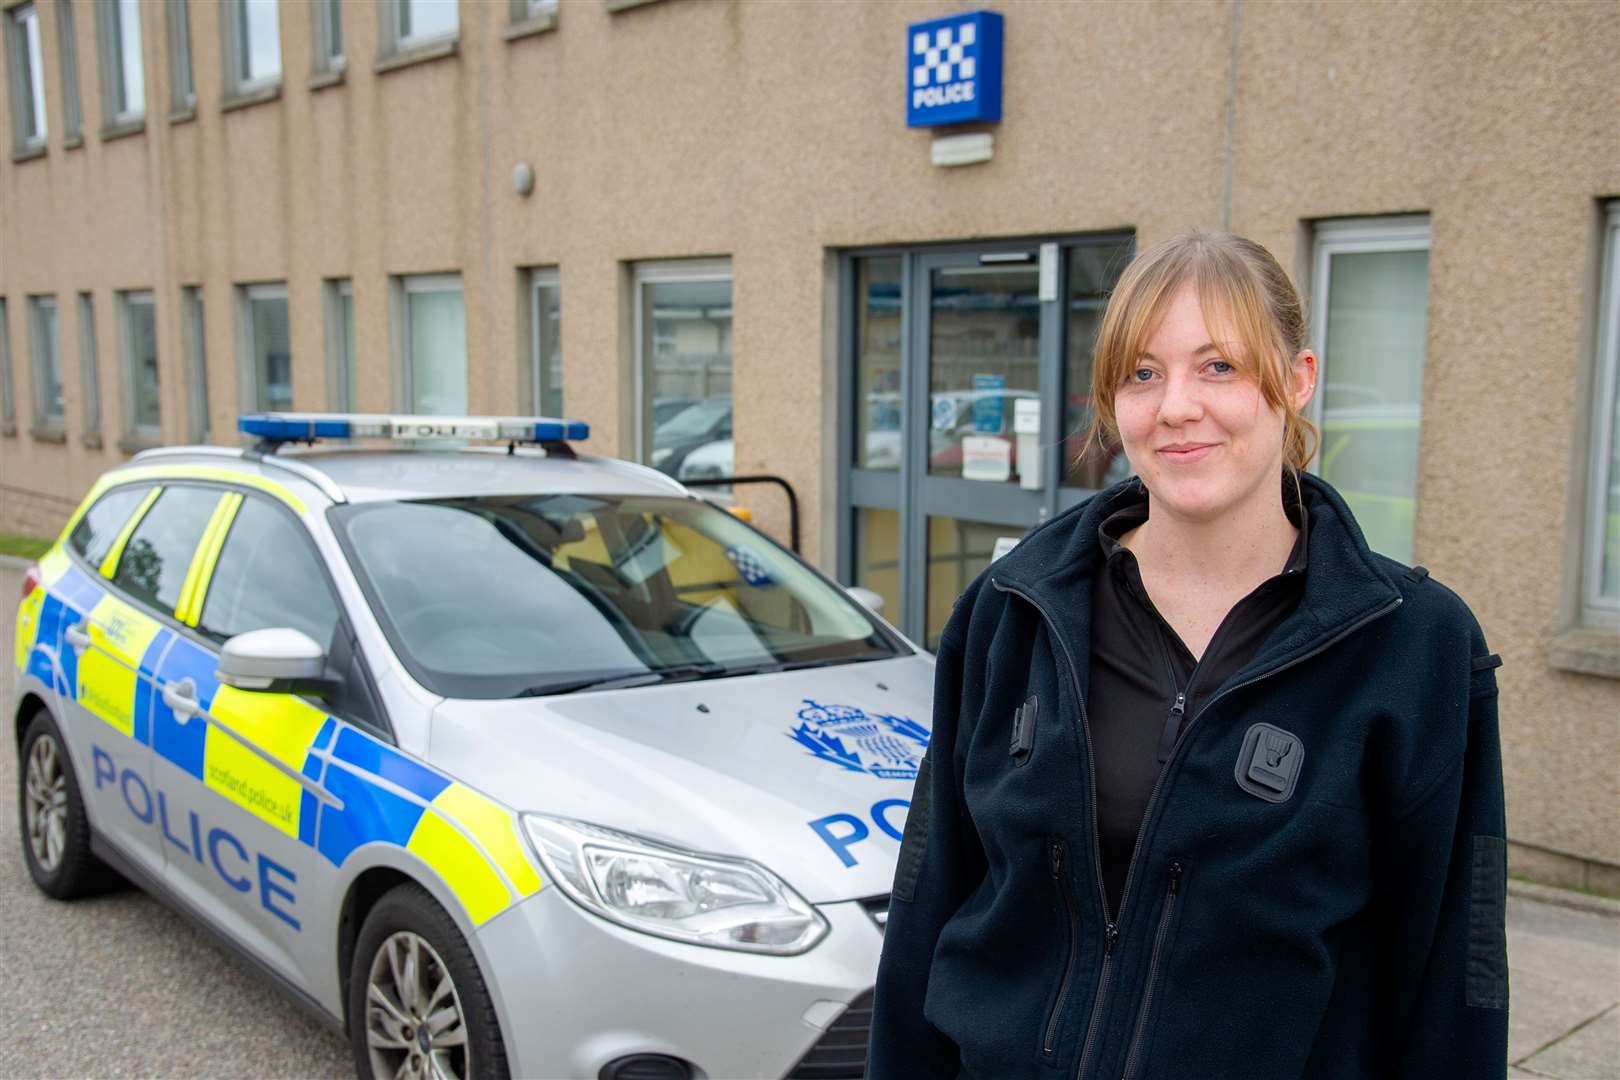 Buckie's Community Officer PC Rachel Barclay is is set to hold a number of local surgeries. Picture: Daniel Forsyth